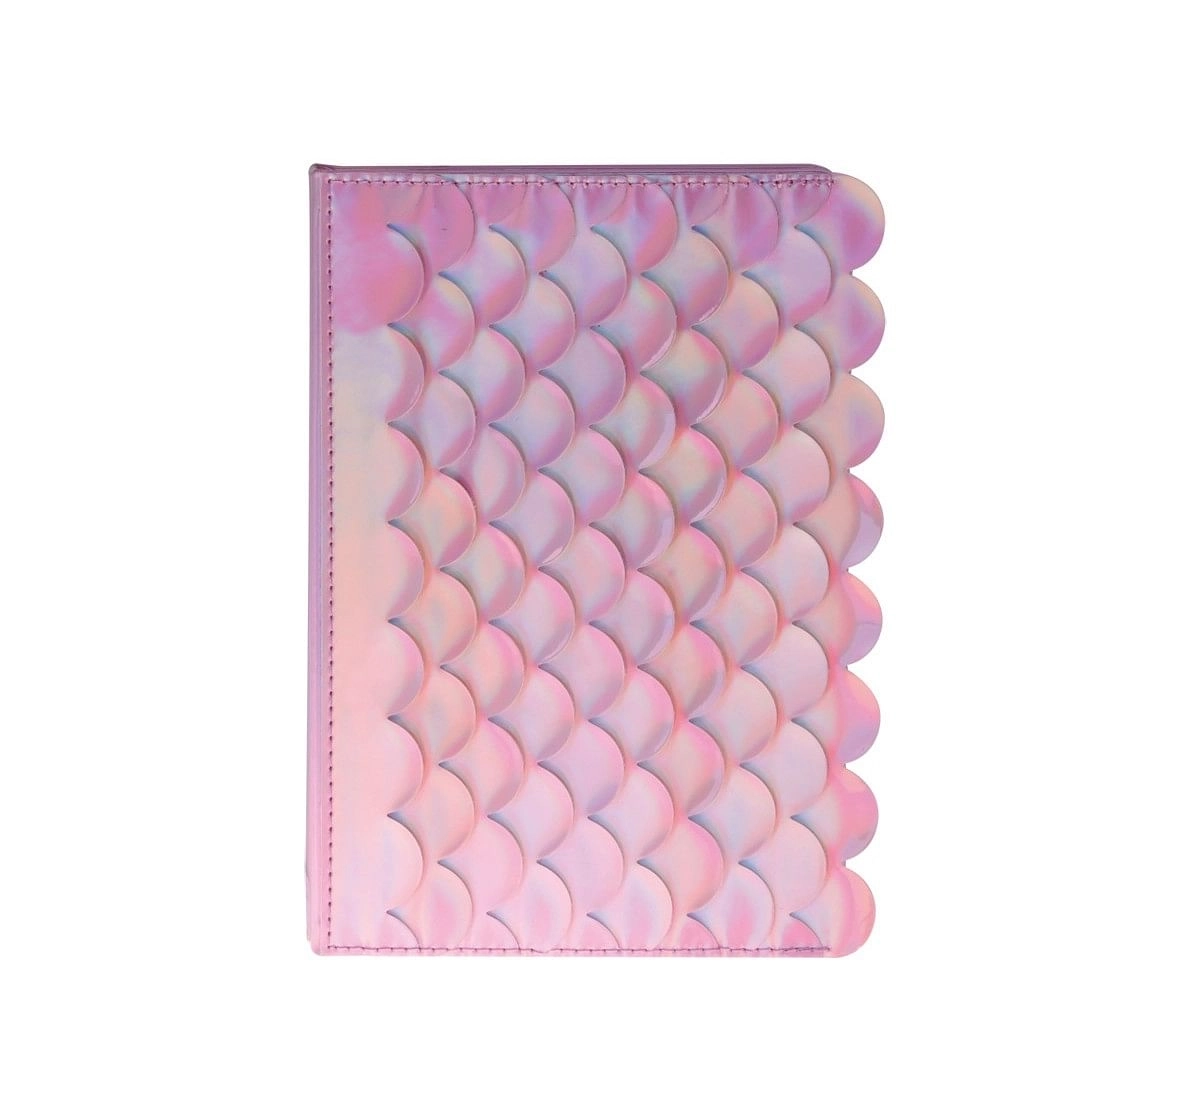 Syloon Metallic - Mermaid Pink Holo Pu A5 Notebook Study & Desk Accessories for Kids age 5Y+ (Pink)